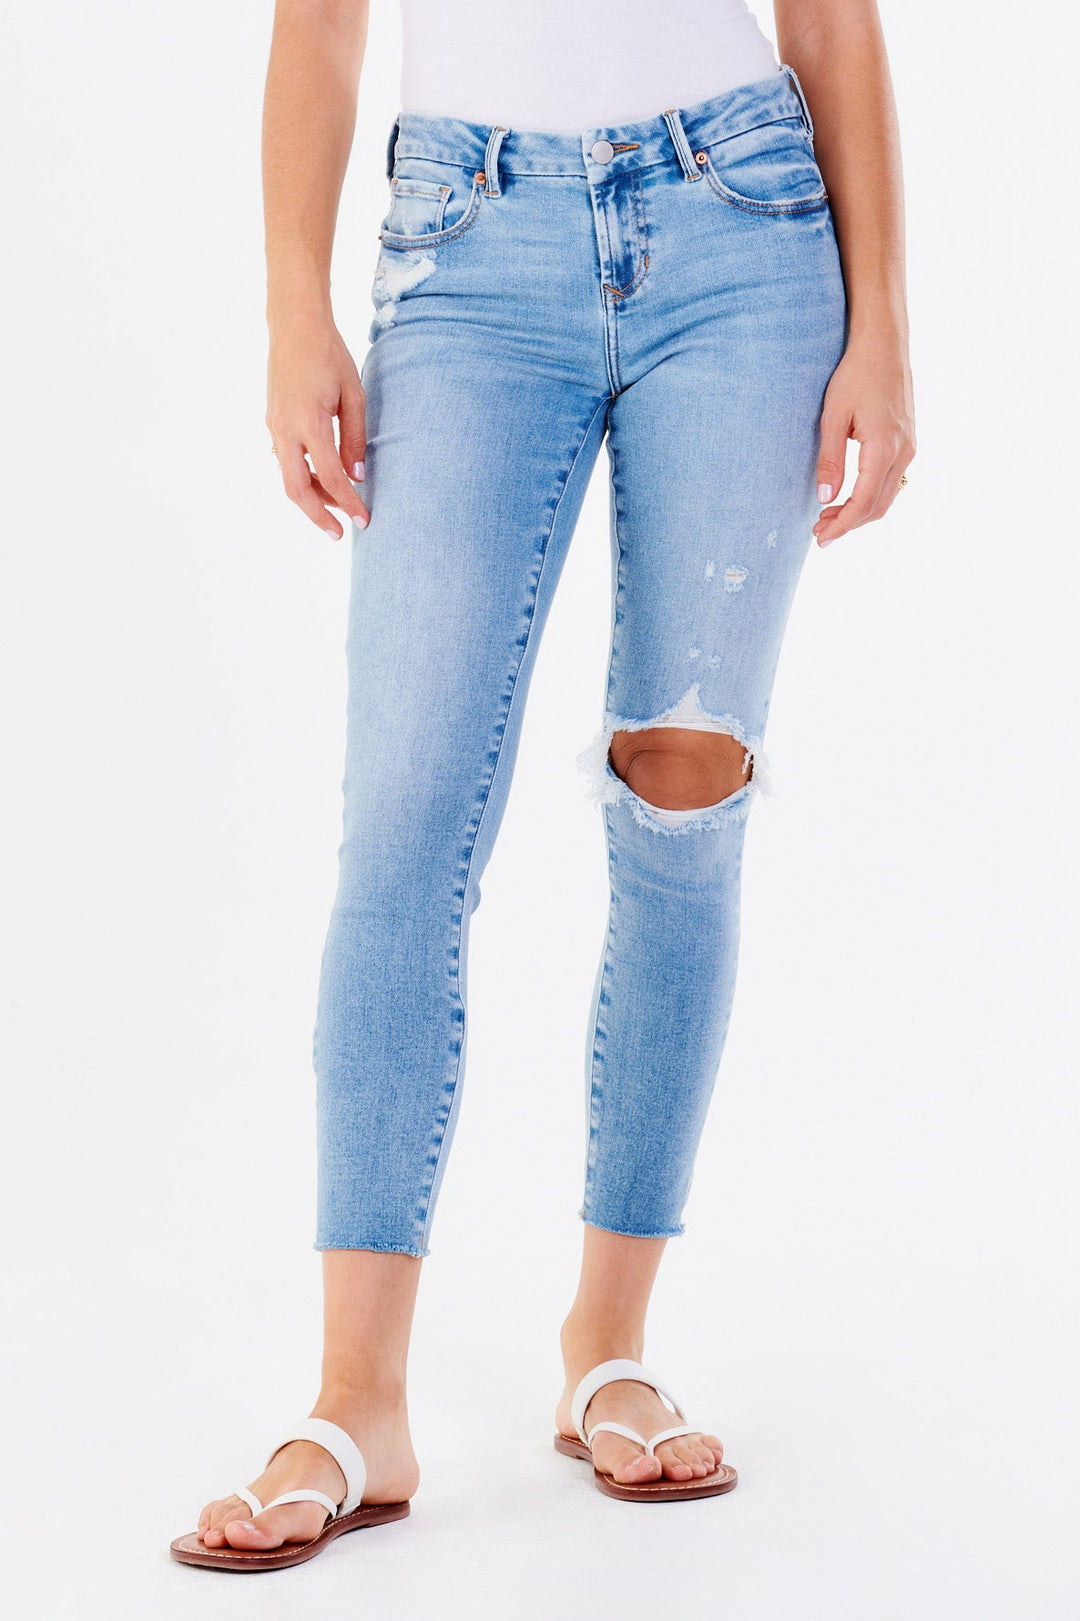 image of a female model wearing a JOYRICH MID RISE ANKLE SKINNY JEANS ORINDA JEANS